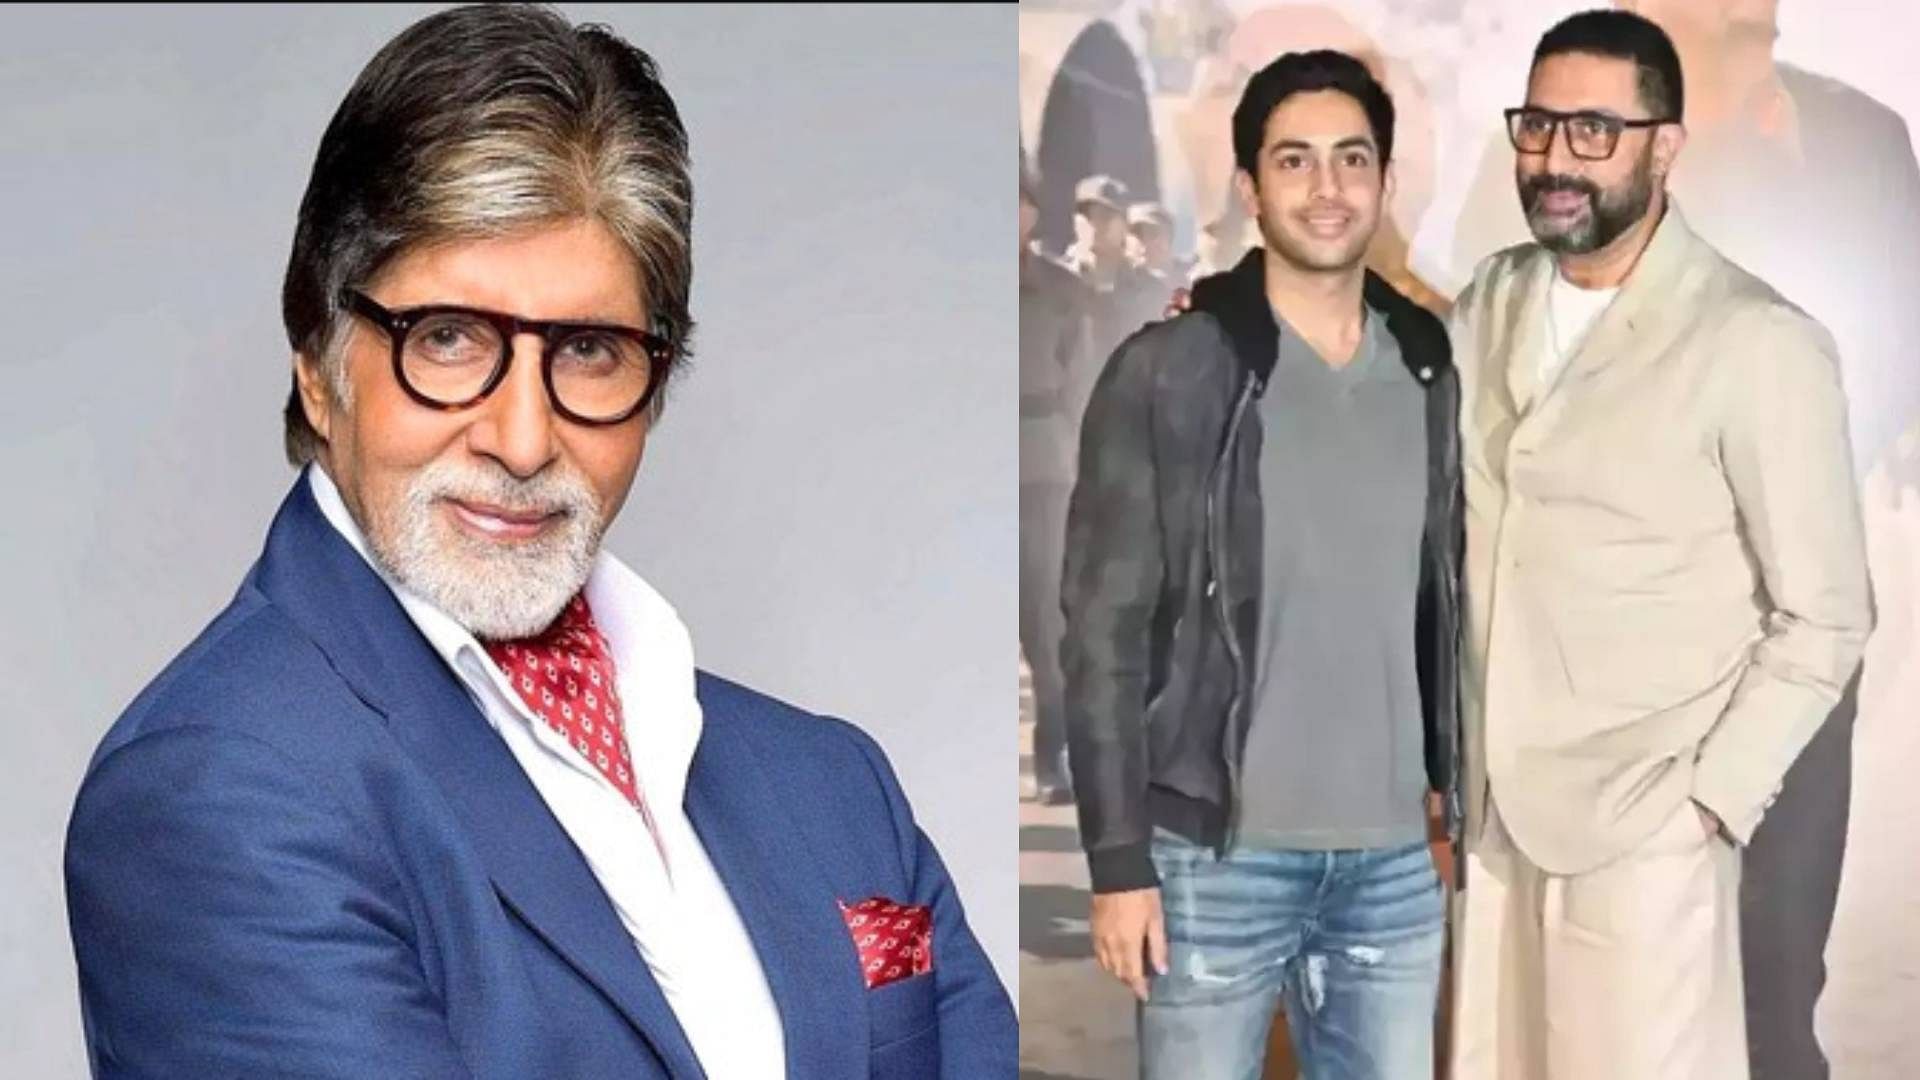 Why should Amitabh Bachchan not be called a superstar? - Quora